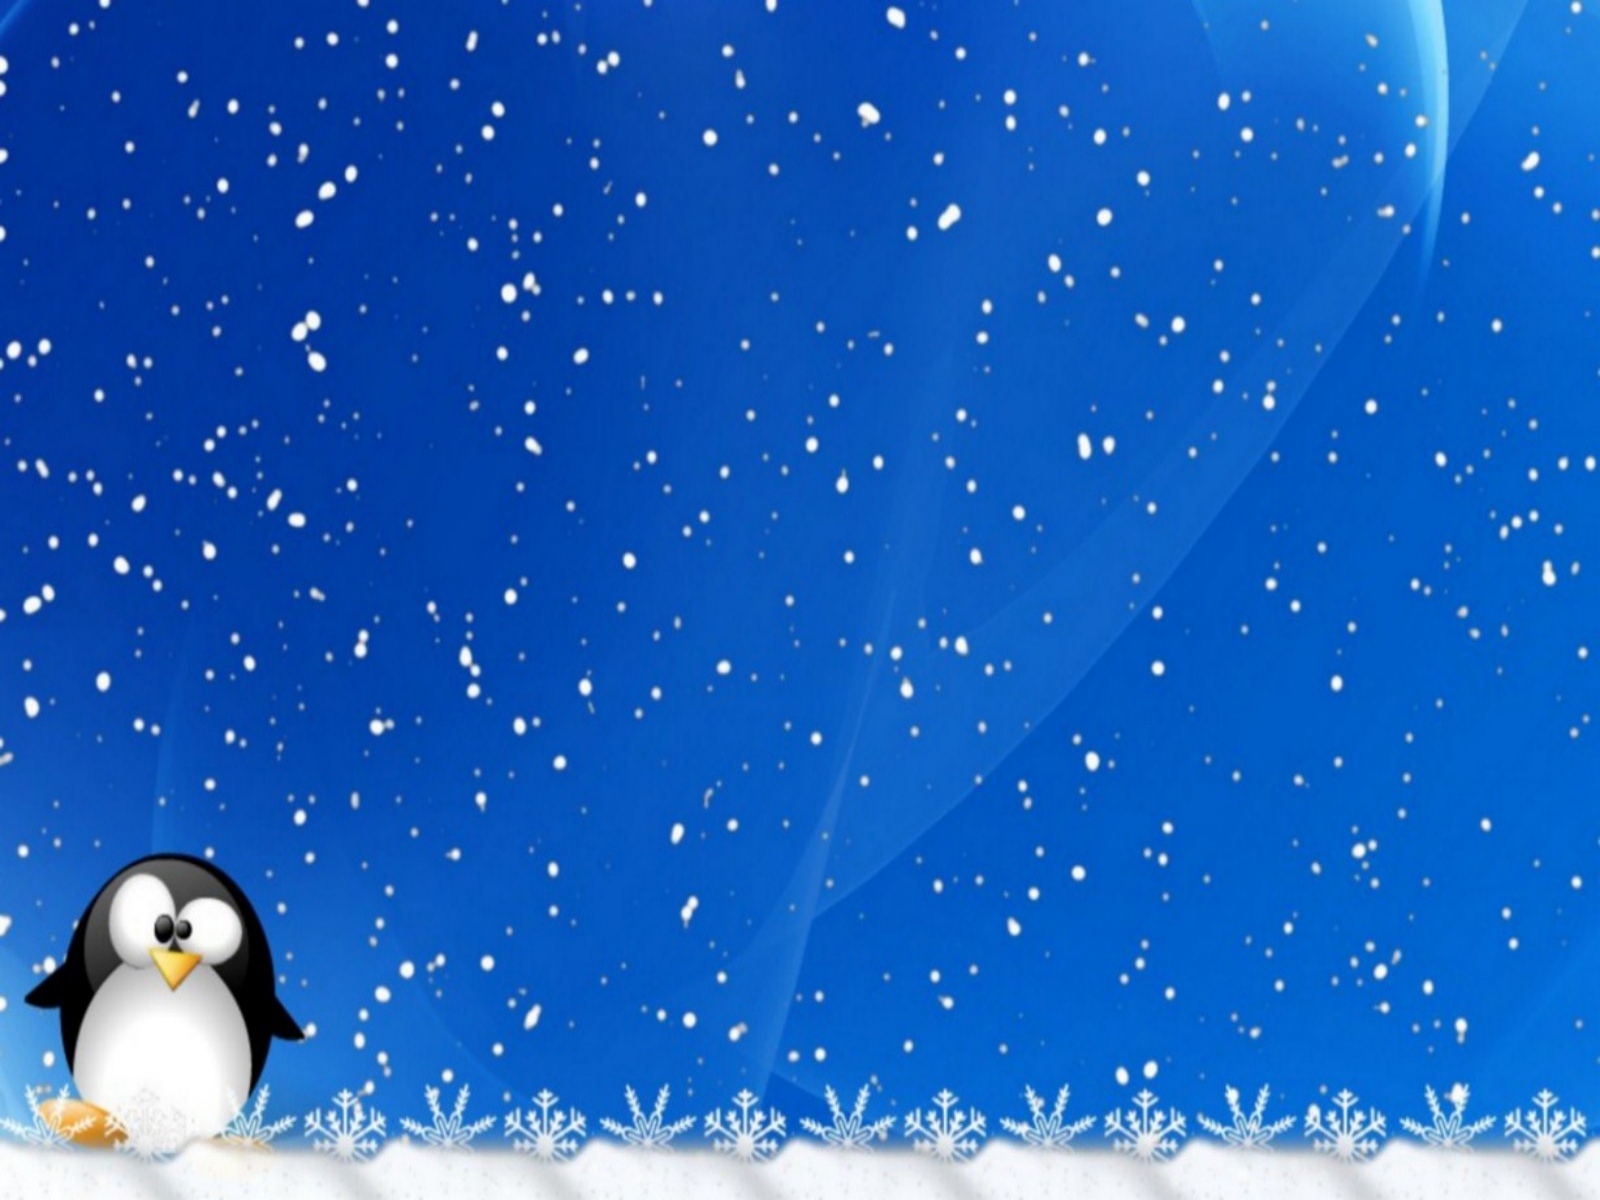 Winter Holiday Background   PowerPoint Backgrounds for Free